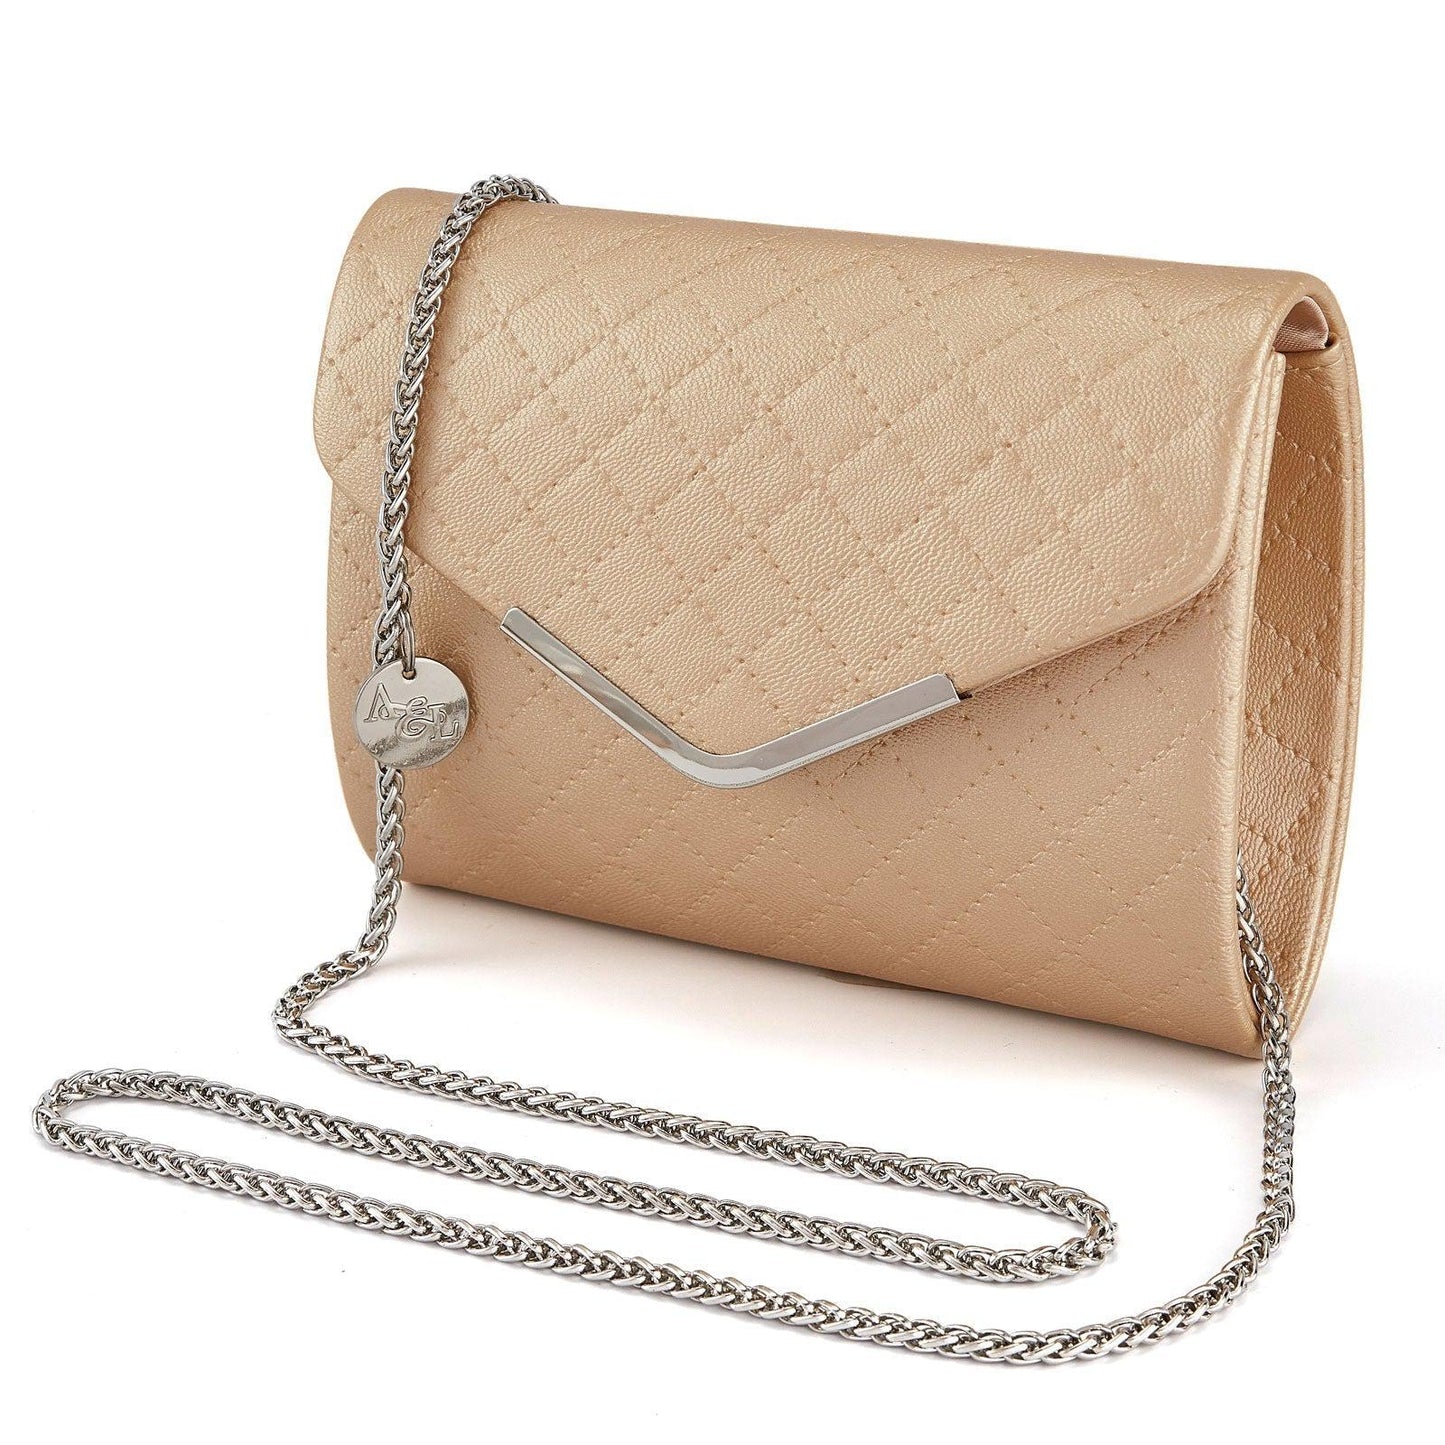 Matte Gold Clutch Purse for Women, Adjustable Chain Quilted Crossbody Shoulder Bag